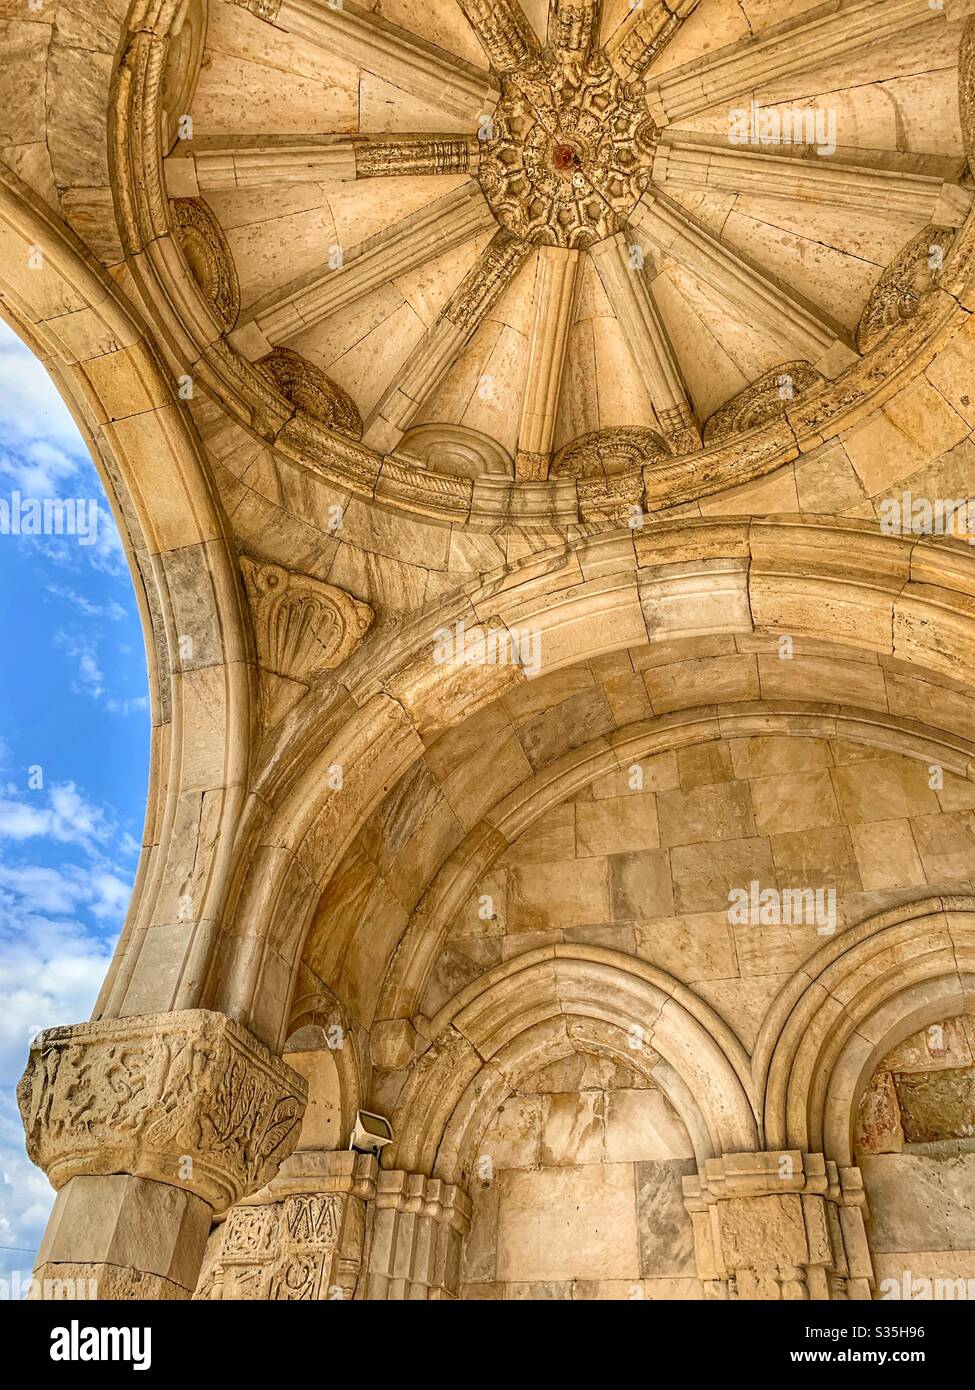 The entrance arch of Gelati Monastery in Kutaisi, Georgia. Beautifully intricate stone carvings against a beautiful blue sky. Stock Photo